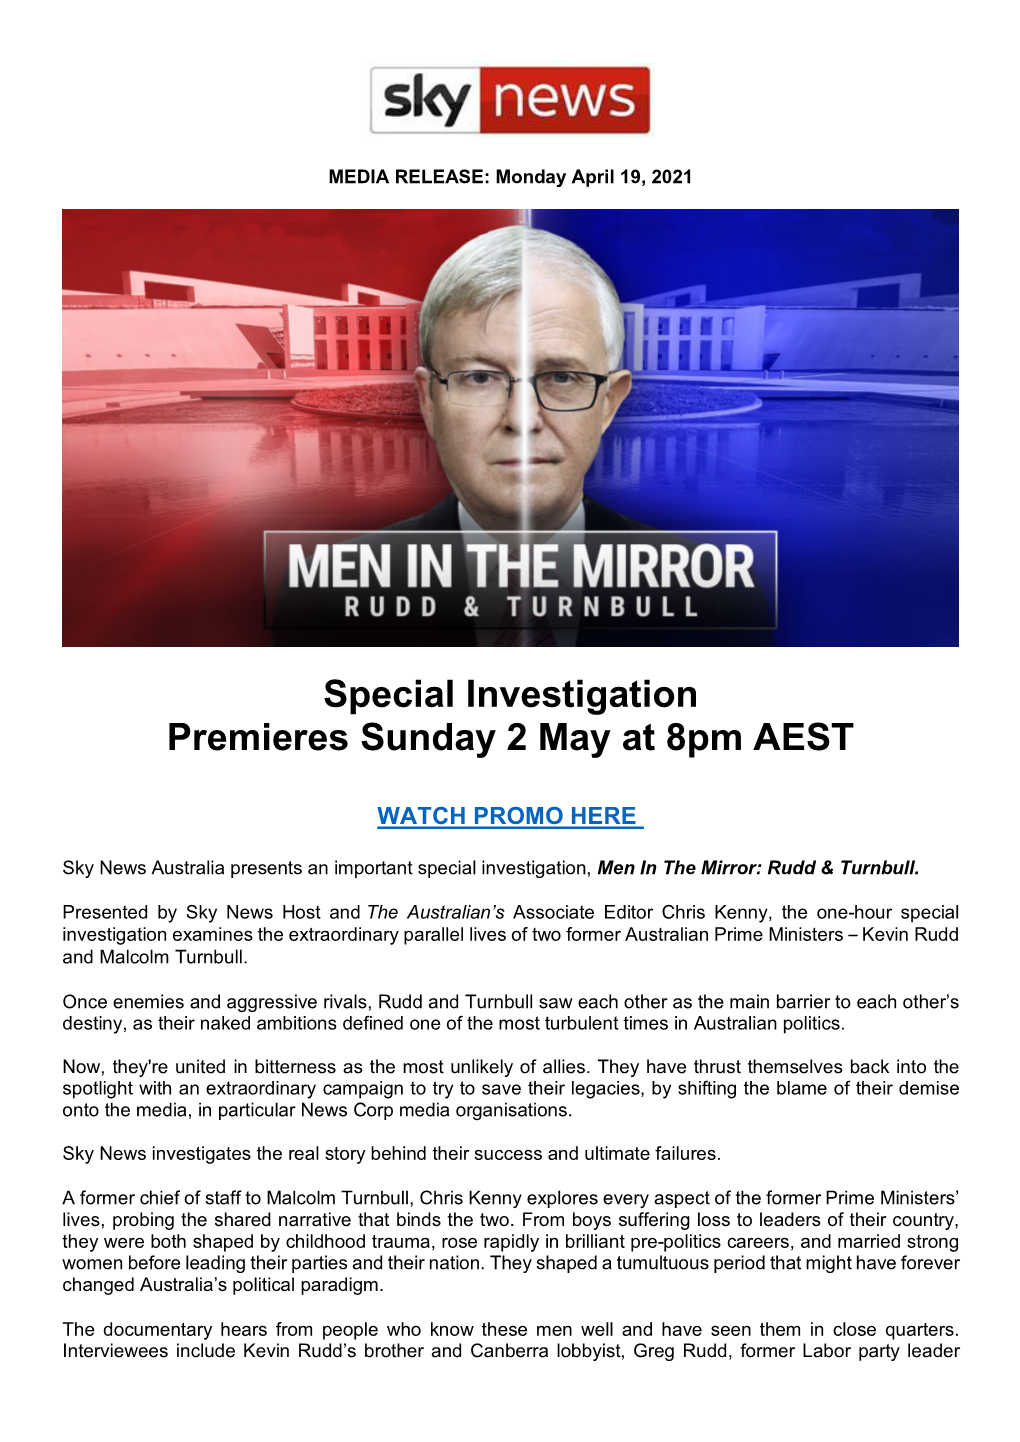 Special Investigation Premieres Sunday 2 May at 8Pm AEST